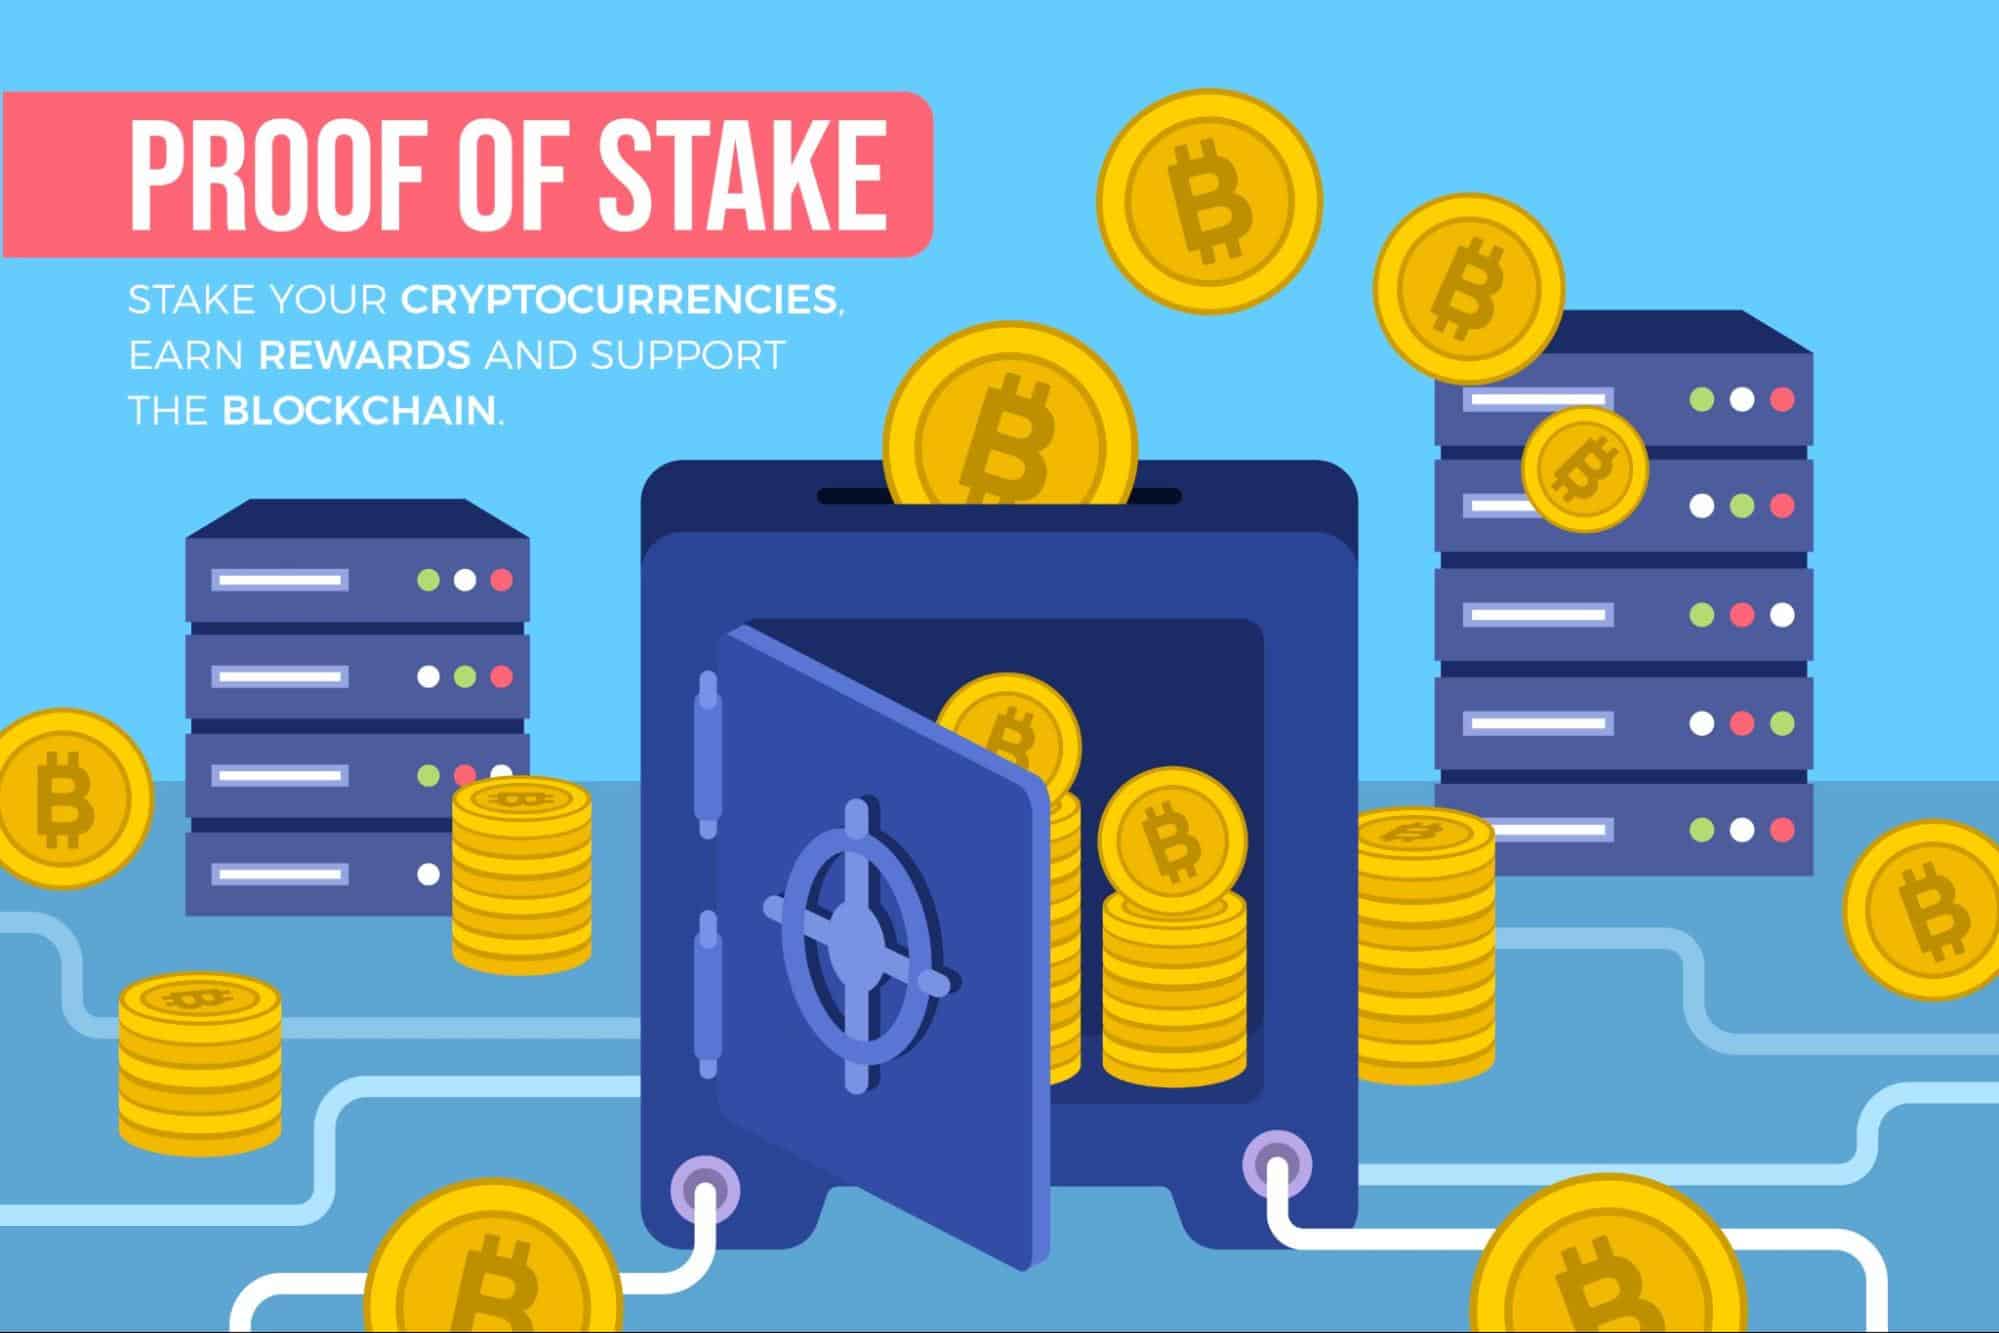 What is Proof of Stake?